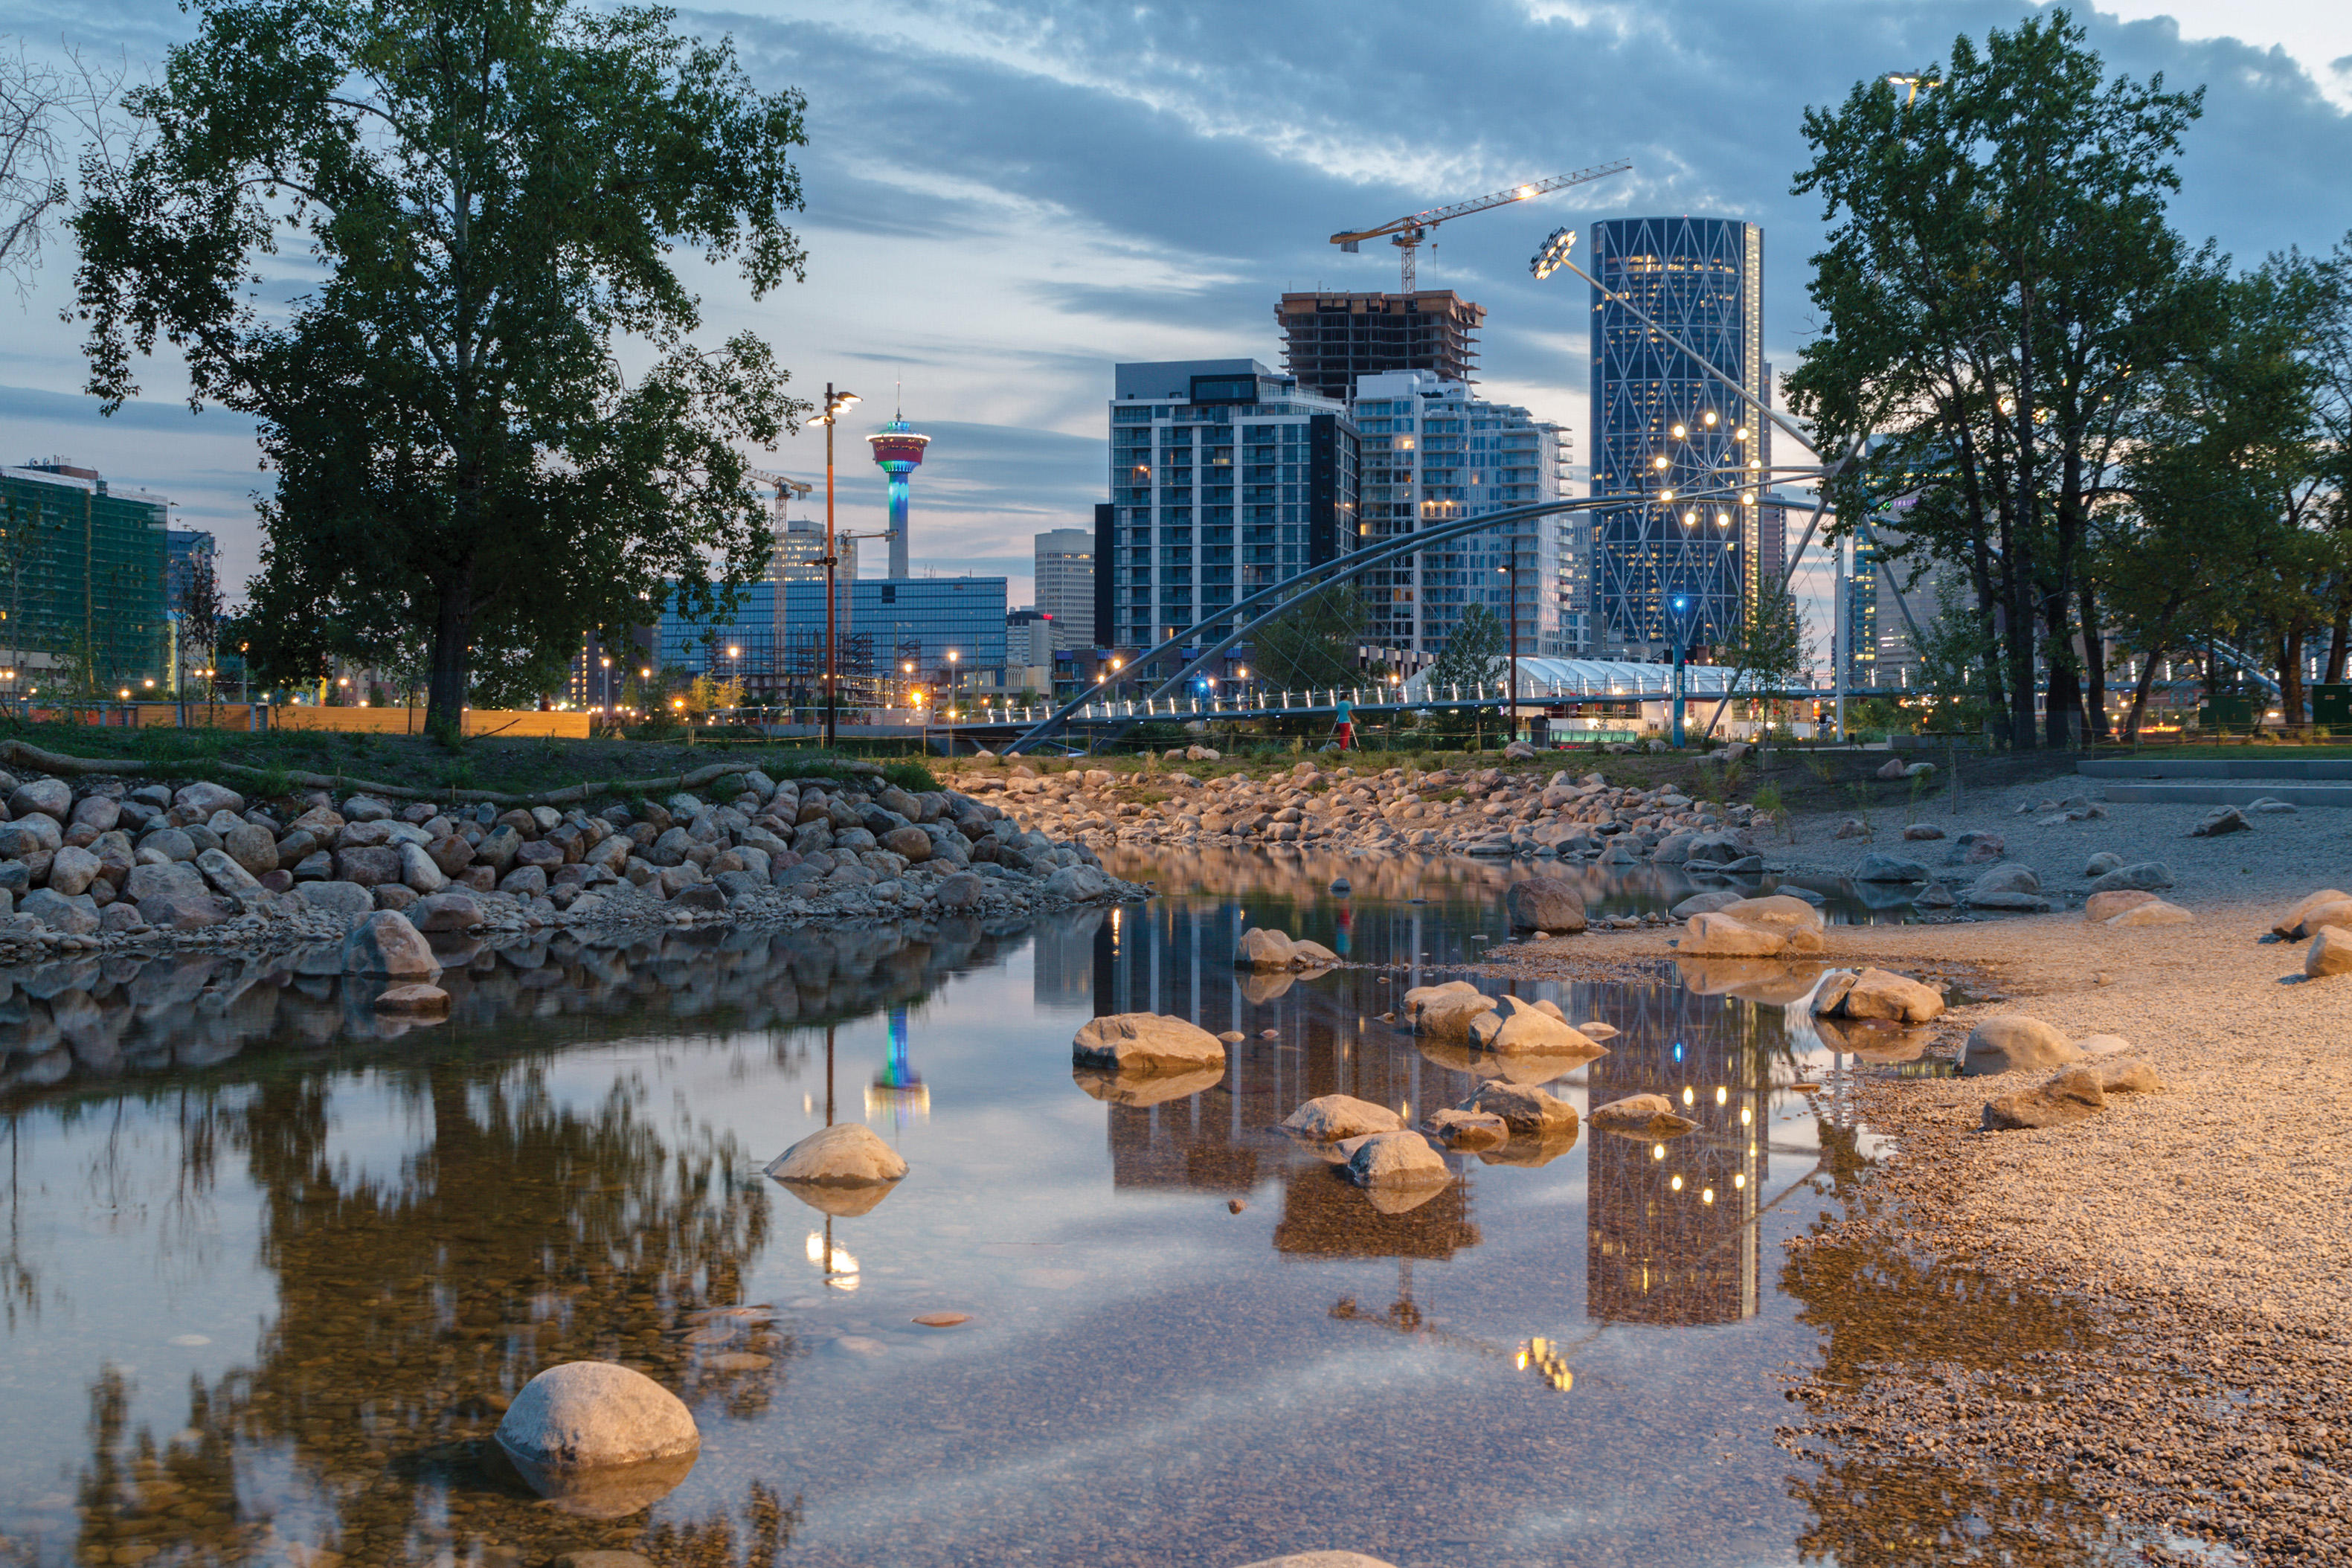 Next Generation of Parks™ event: Experience designer Mark Johnson’s powerful perspective on waterfront renewal, March 9